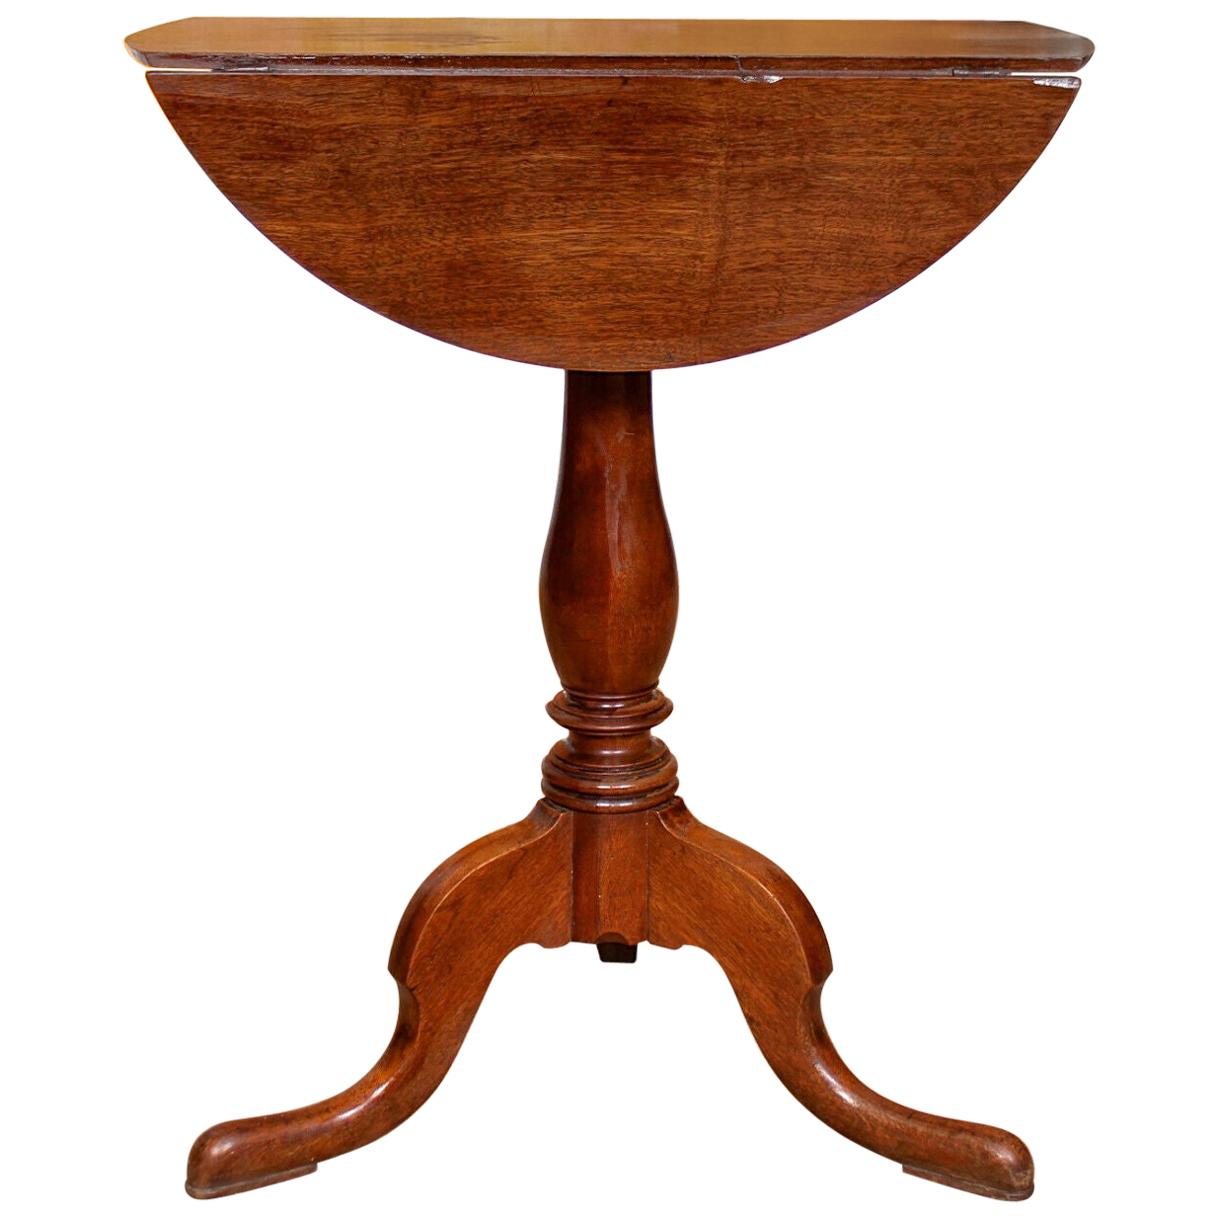 English Side Table Drop-Leaf Tripod 19th Century Mahogany Victorian Side Table For Sale